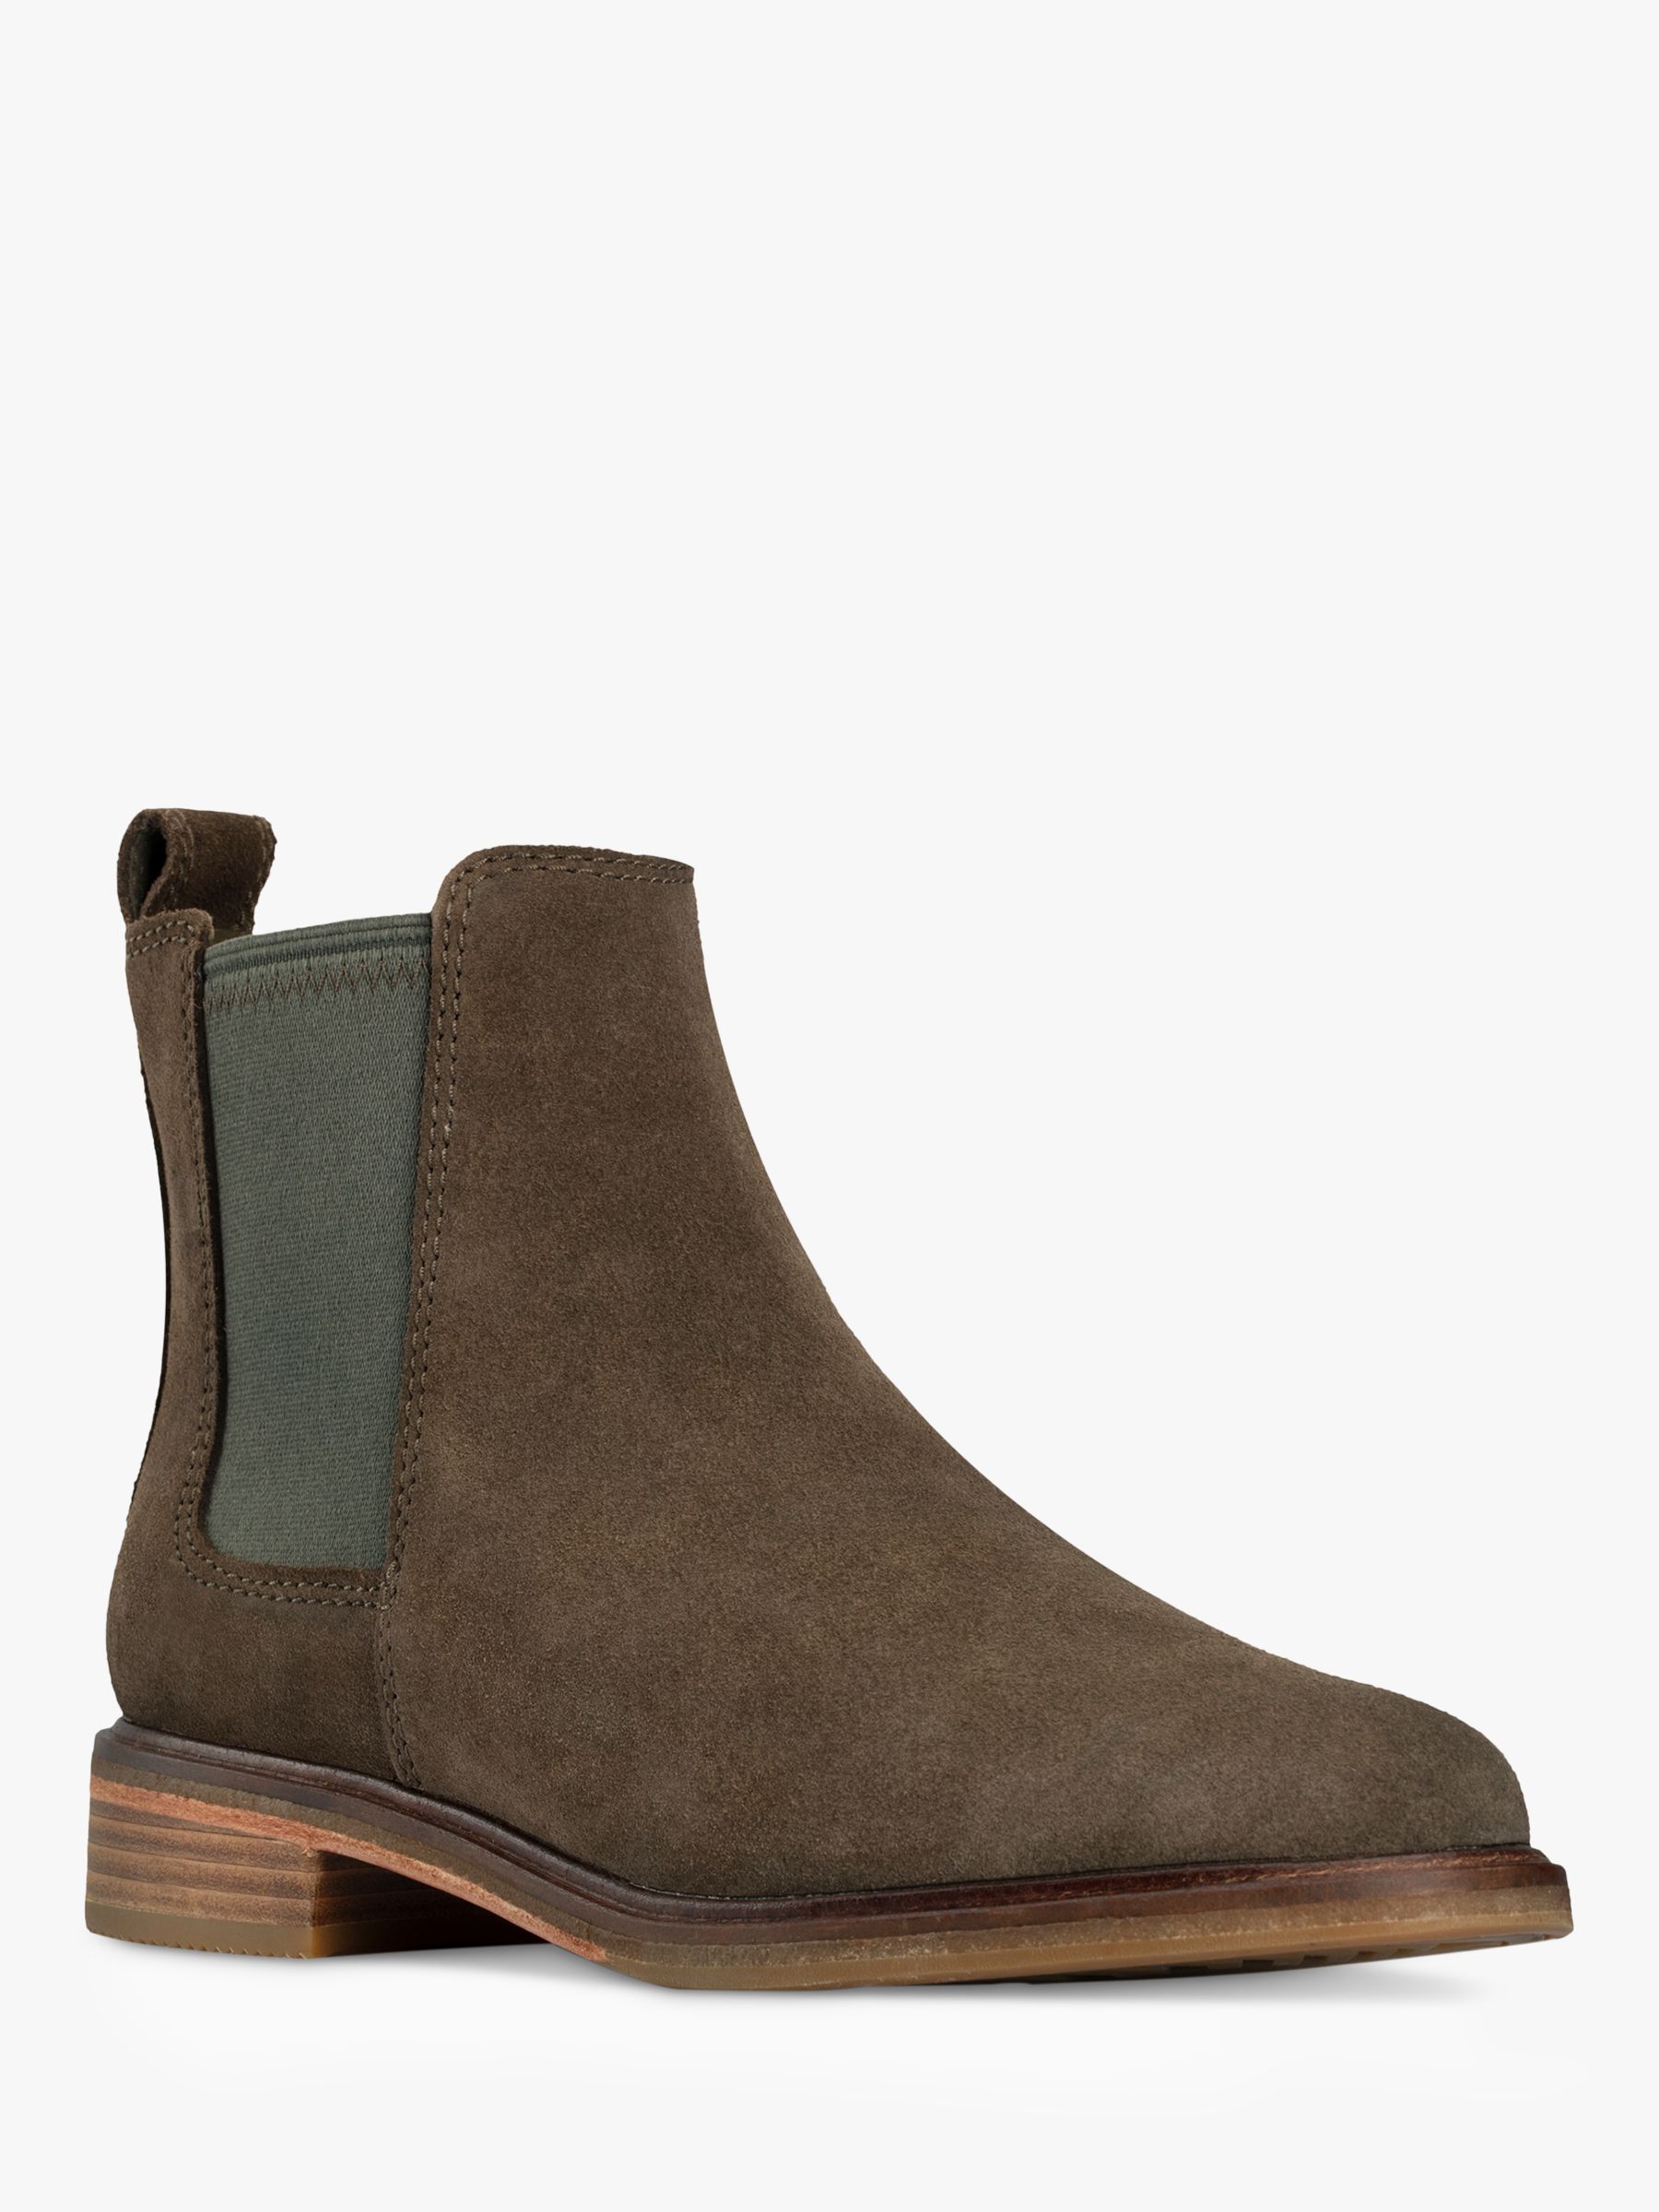 Clarks Clarkdale Arlo Suede Chelsea Boots, Dark Olive at John Lewis ...